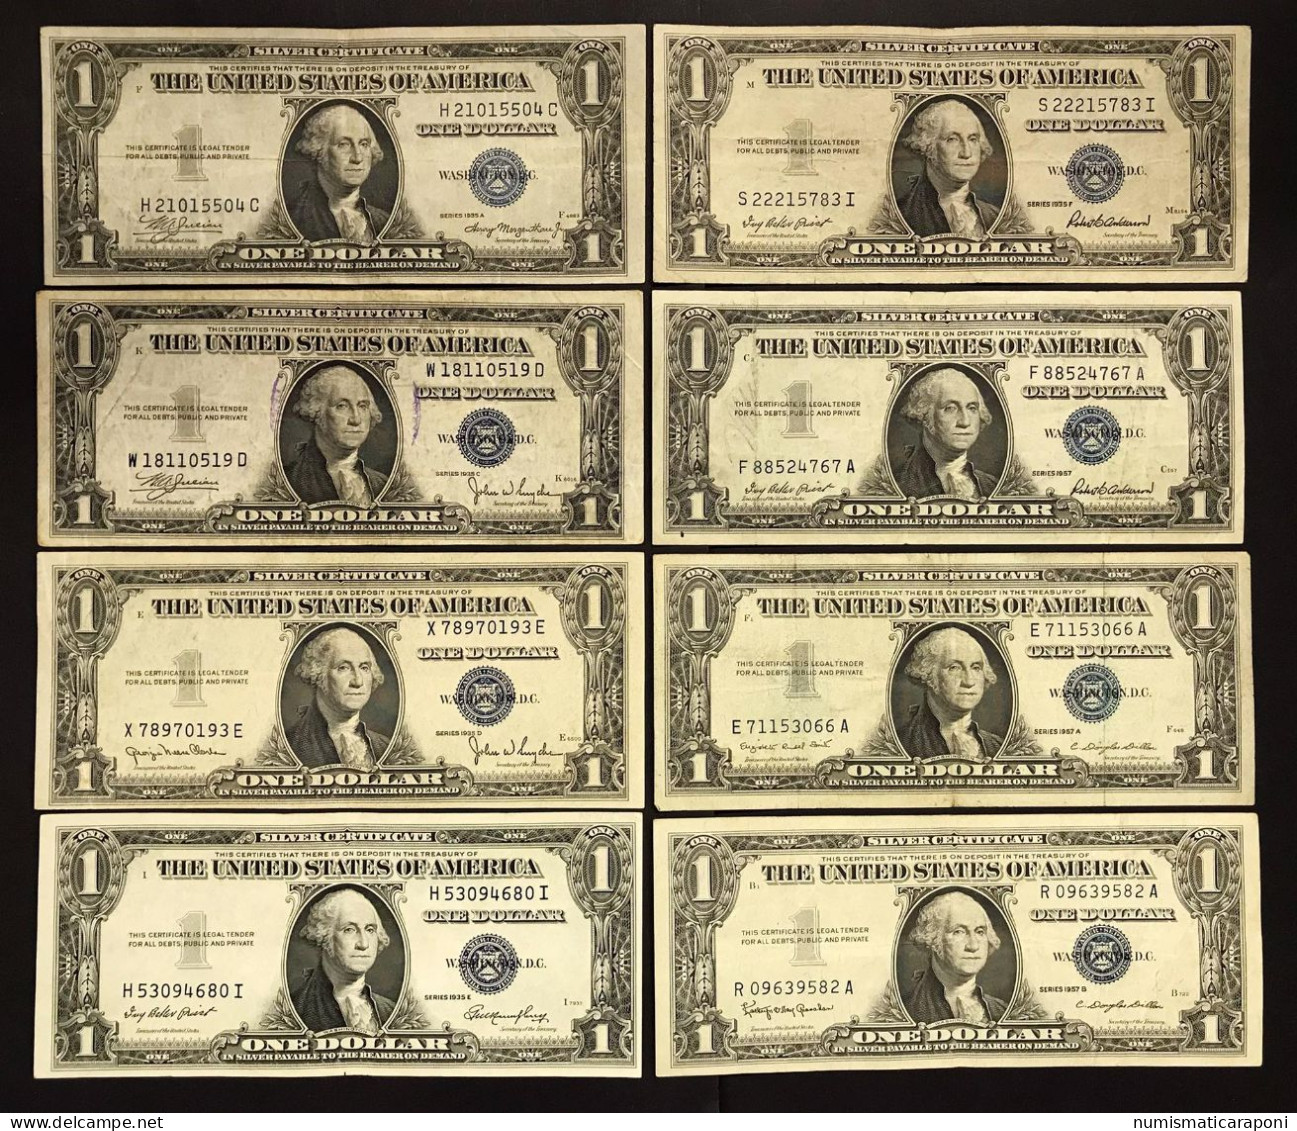 Usa U.s.a. Stati Uniti 1935 A C D E + 1957 + A B F $1 DOLLAR BILL UNITED STATES LEGAL TENDER NOTE Blue Seal  LOTTO.620 - Silver Certificates (1878-1923)